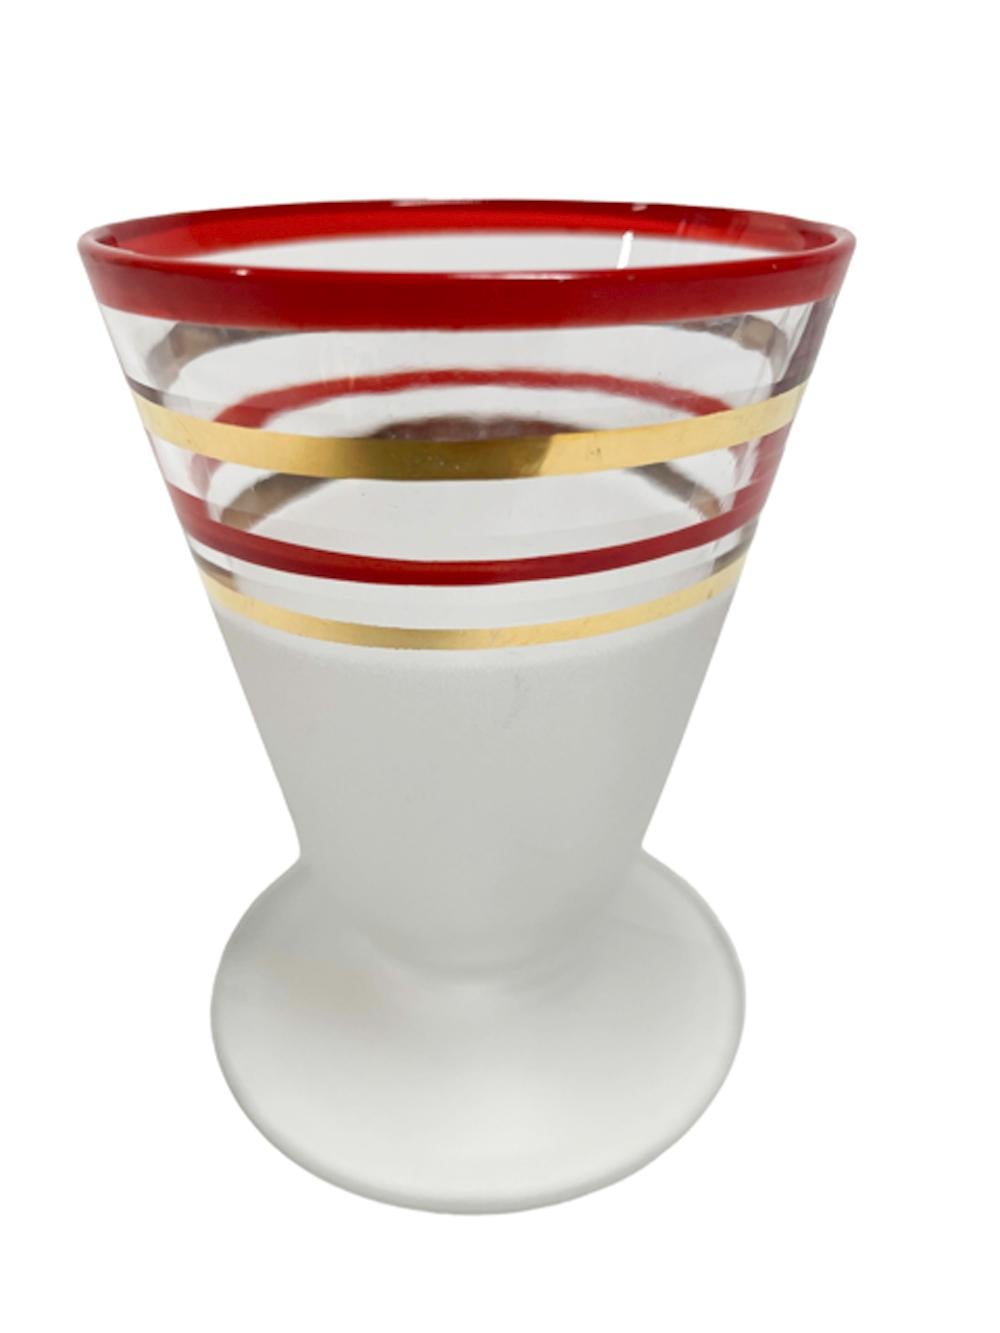 Nine piece Art Deco cocktail shaker set, cocktail shaker and 8 footed cocktail glasses with cone shaped bowls. Each piece decorated with red enamel and 22k gold bands on clear glass above frosted lower section.